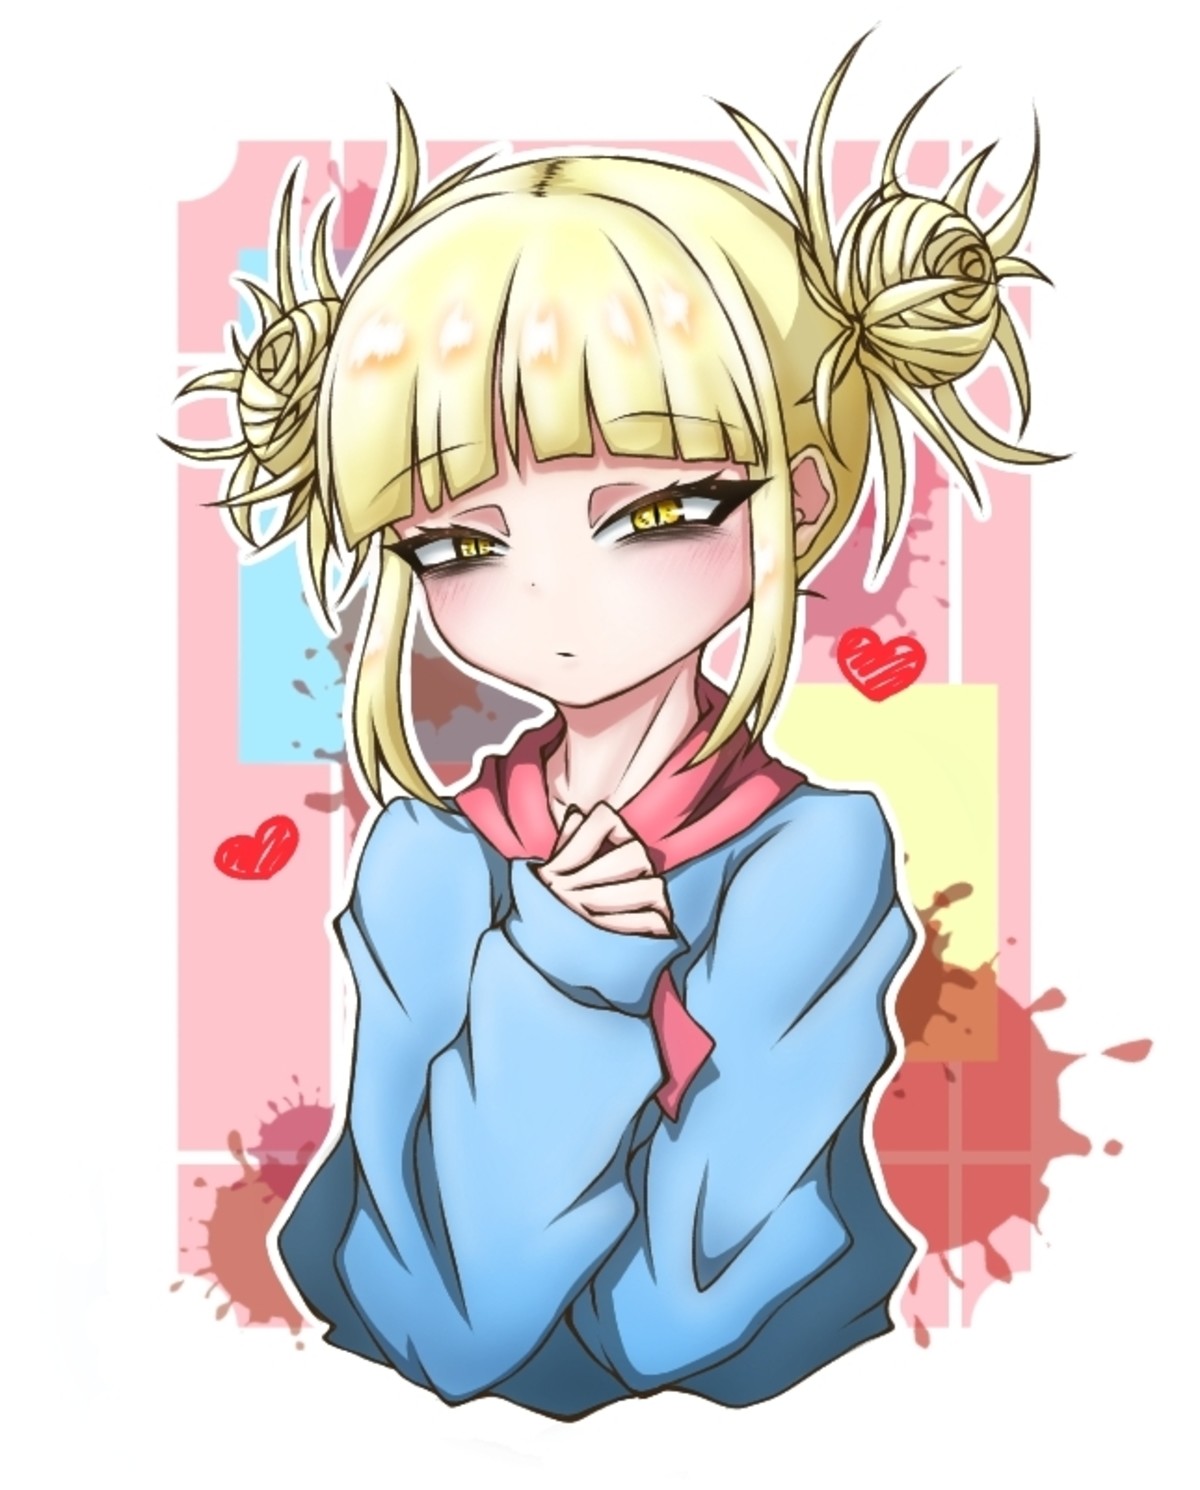 Daily Toga - 962: Shy Toga. join list: DailyToga (477 subs)Mention History Source: .. She looks so innocent